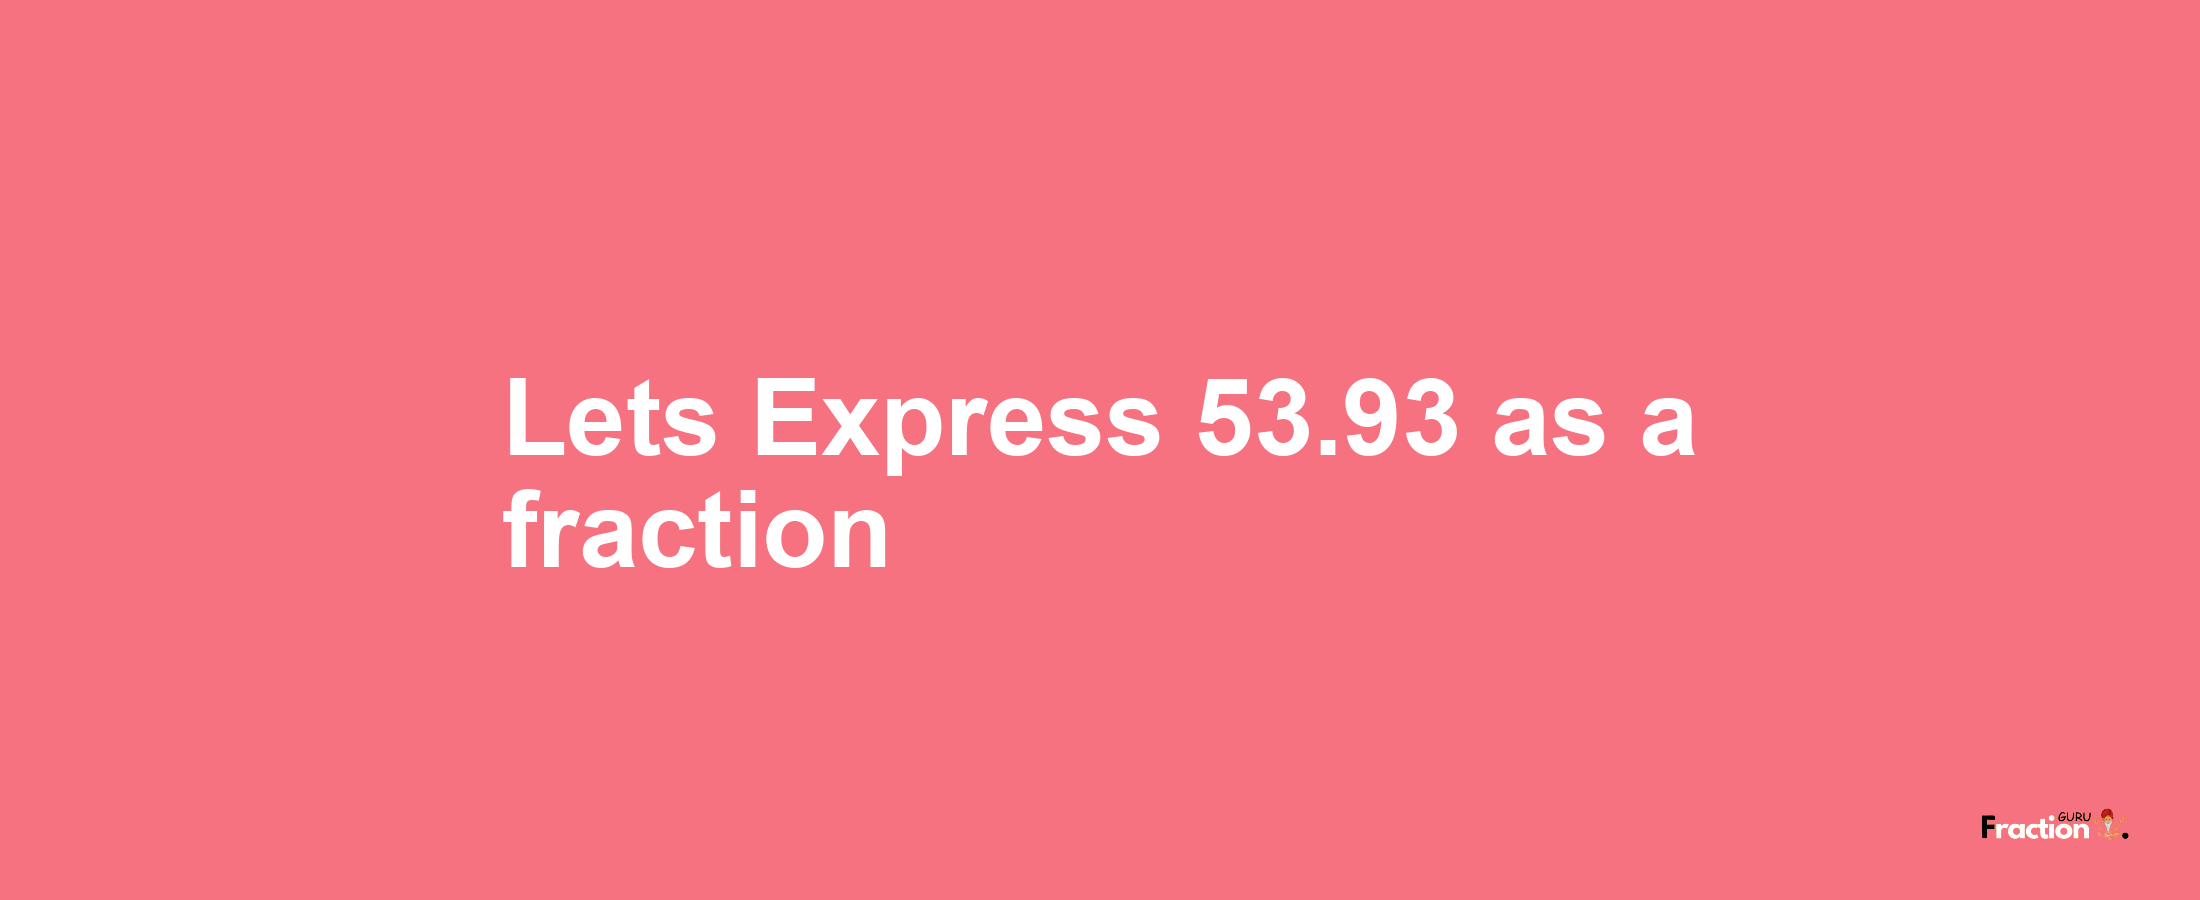 Lets Express 53.93 as afraction